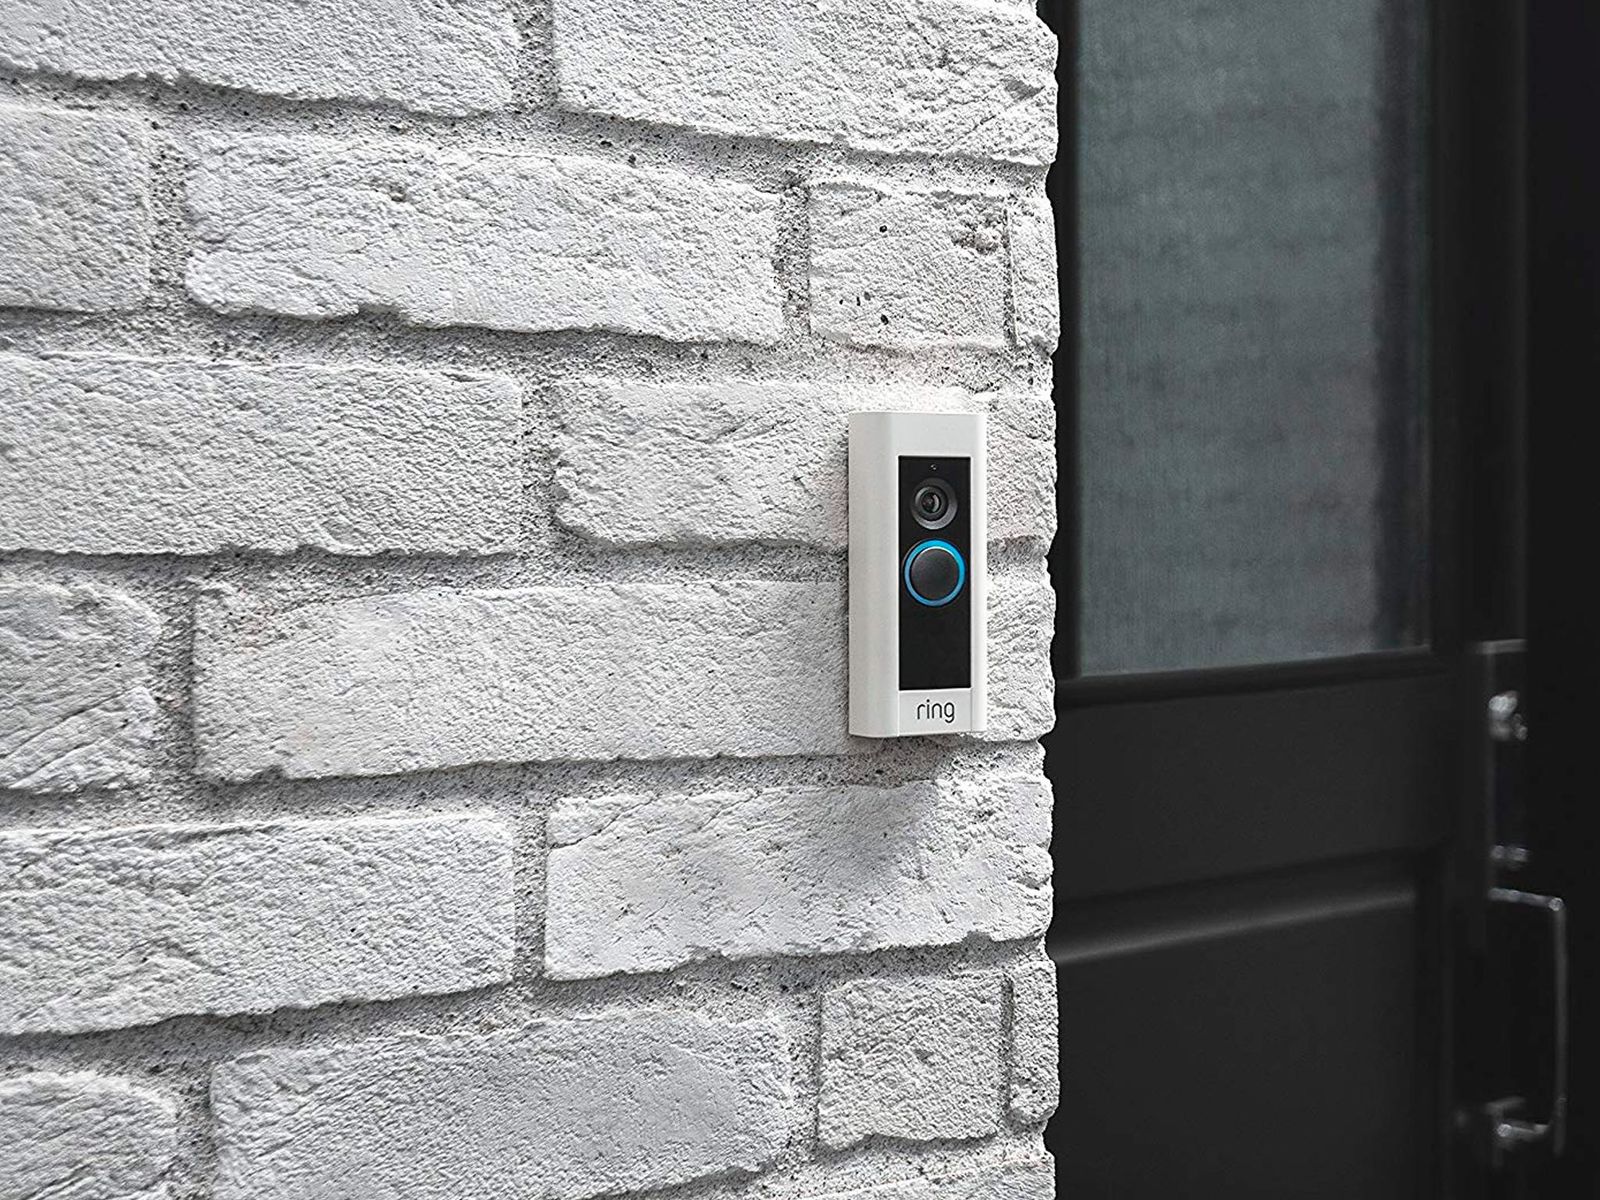 Ring Pro Video Doorbell installed outdoors on a brick wall